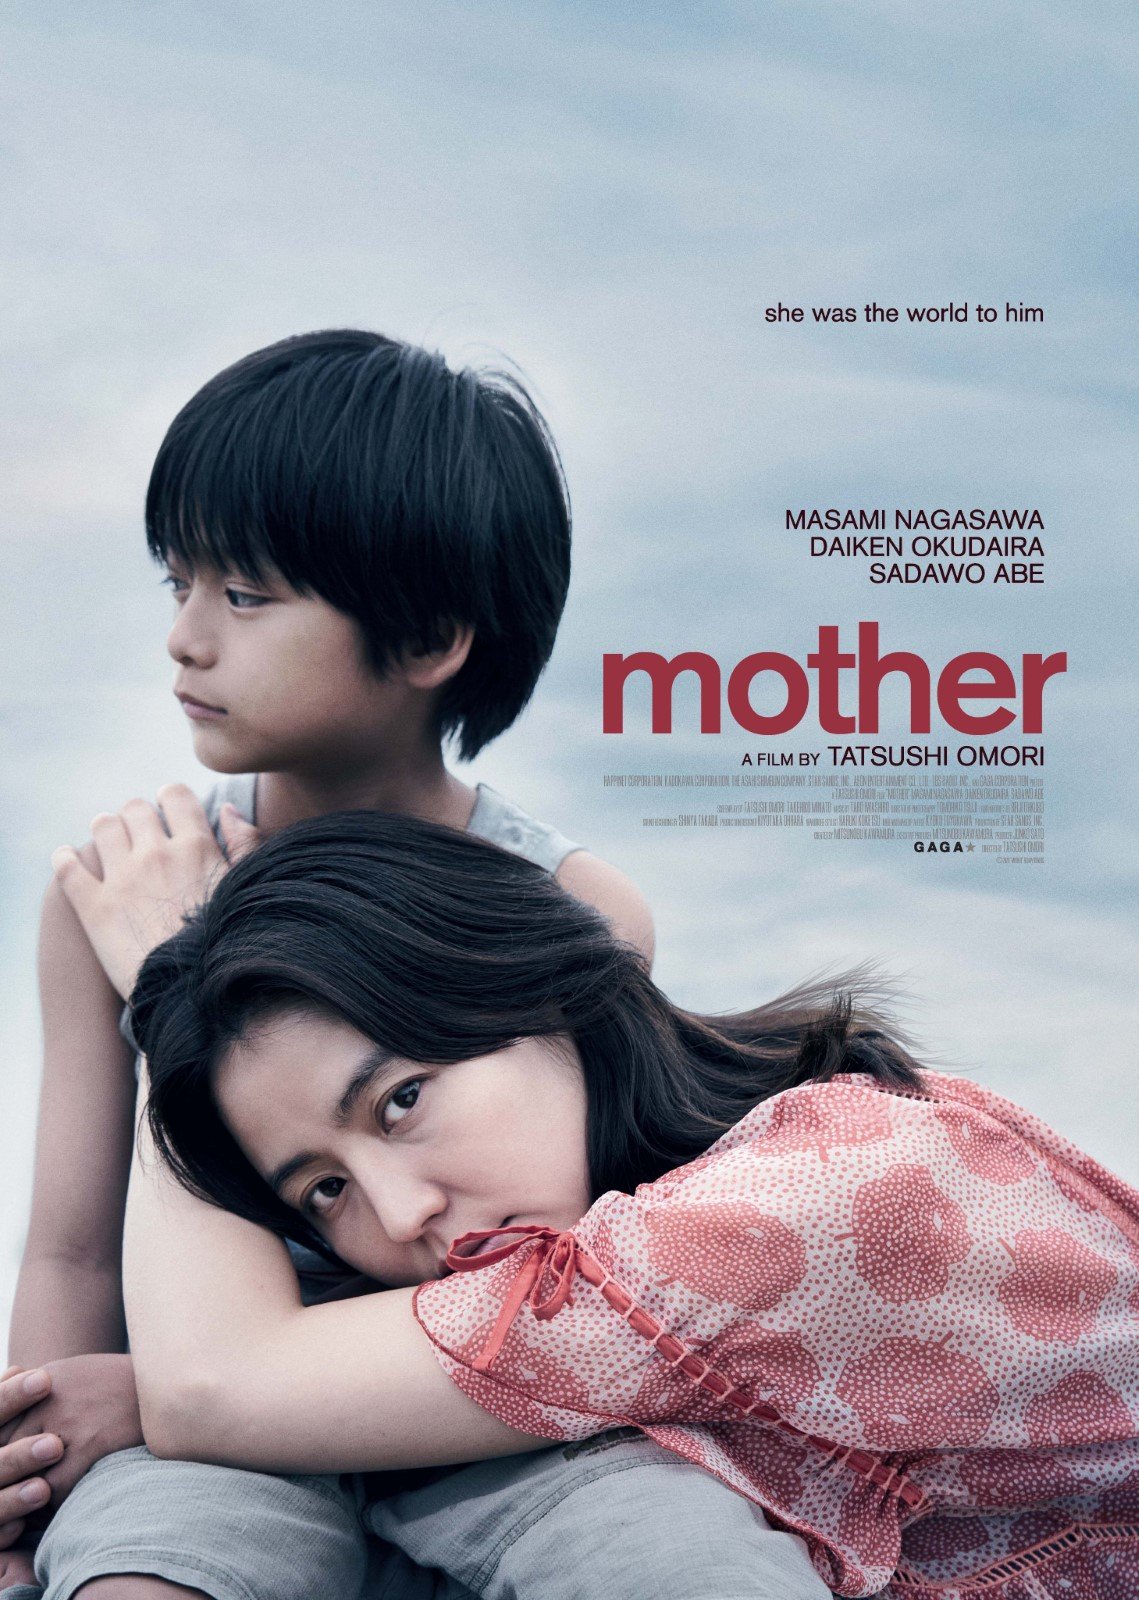 mother movie review reddit